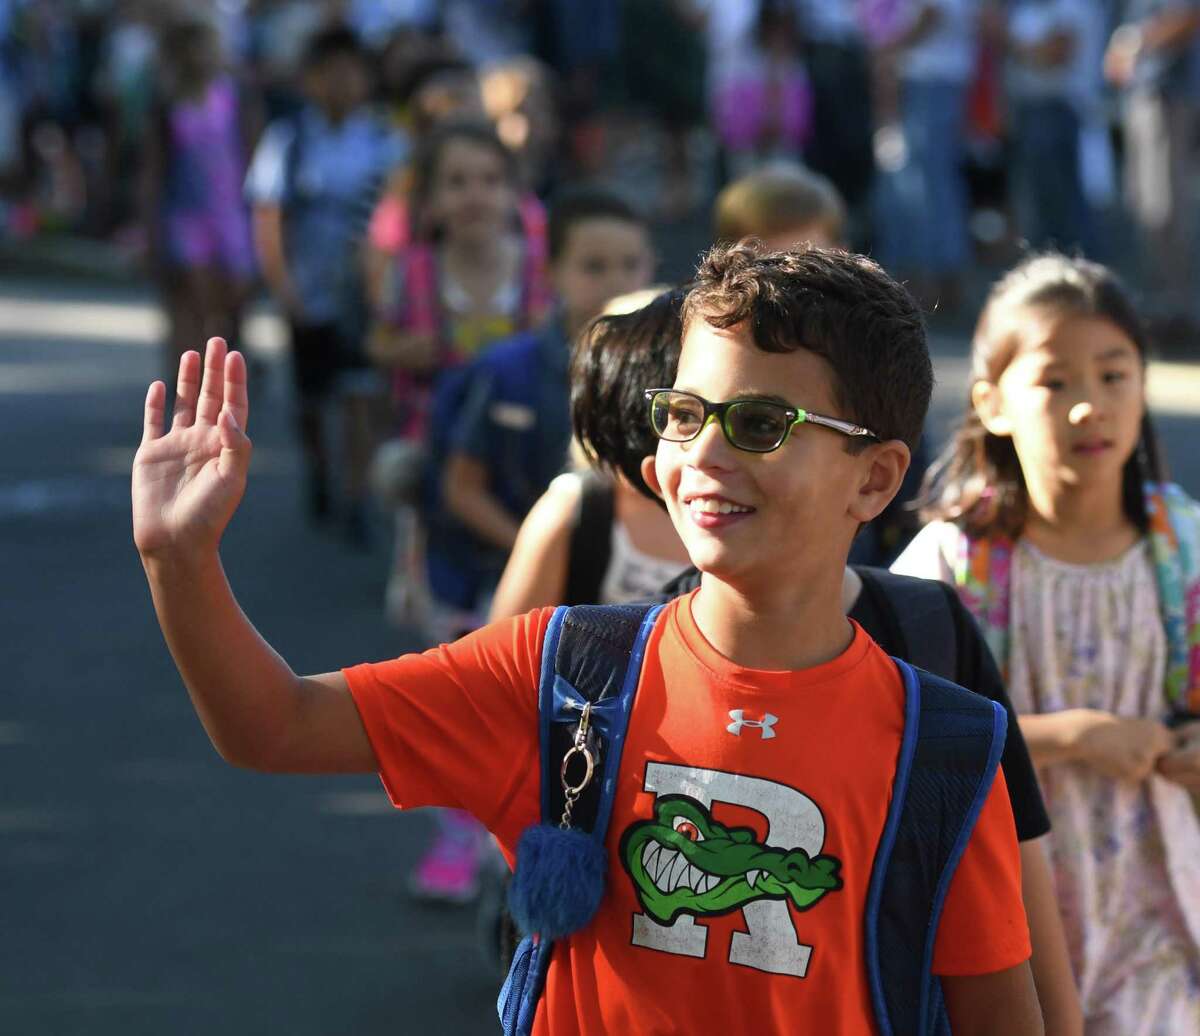 Third-grader Nash Goodman waves to parents in the crowd while walking with his new classmates in the Parade of Learners on the first day of school at Riverside School in the Riverside section of Greenwich, Conn. Thursday, Aug. 29, 2019.